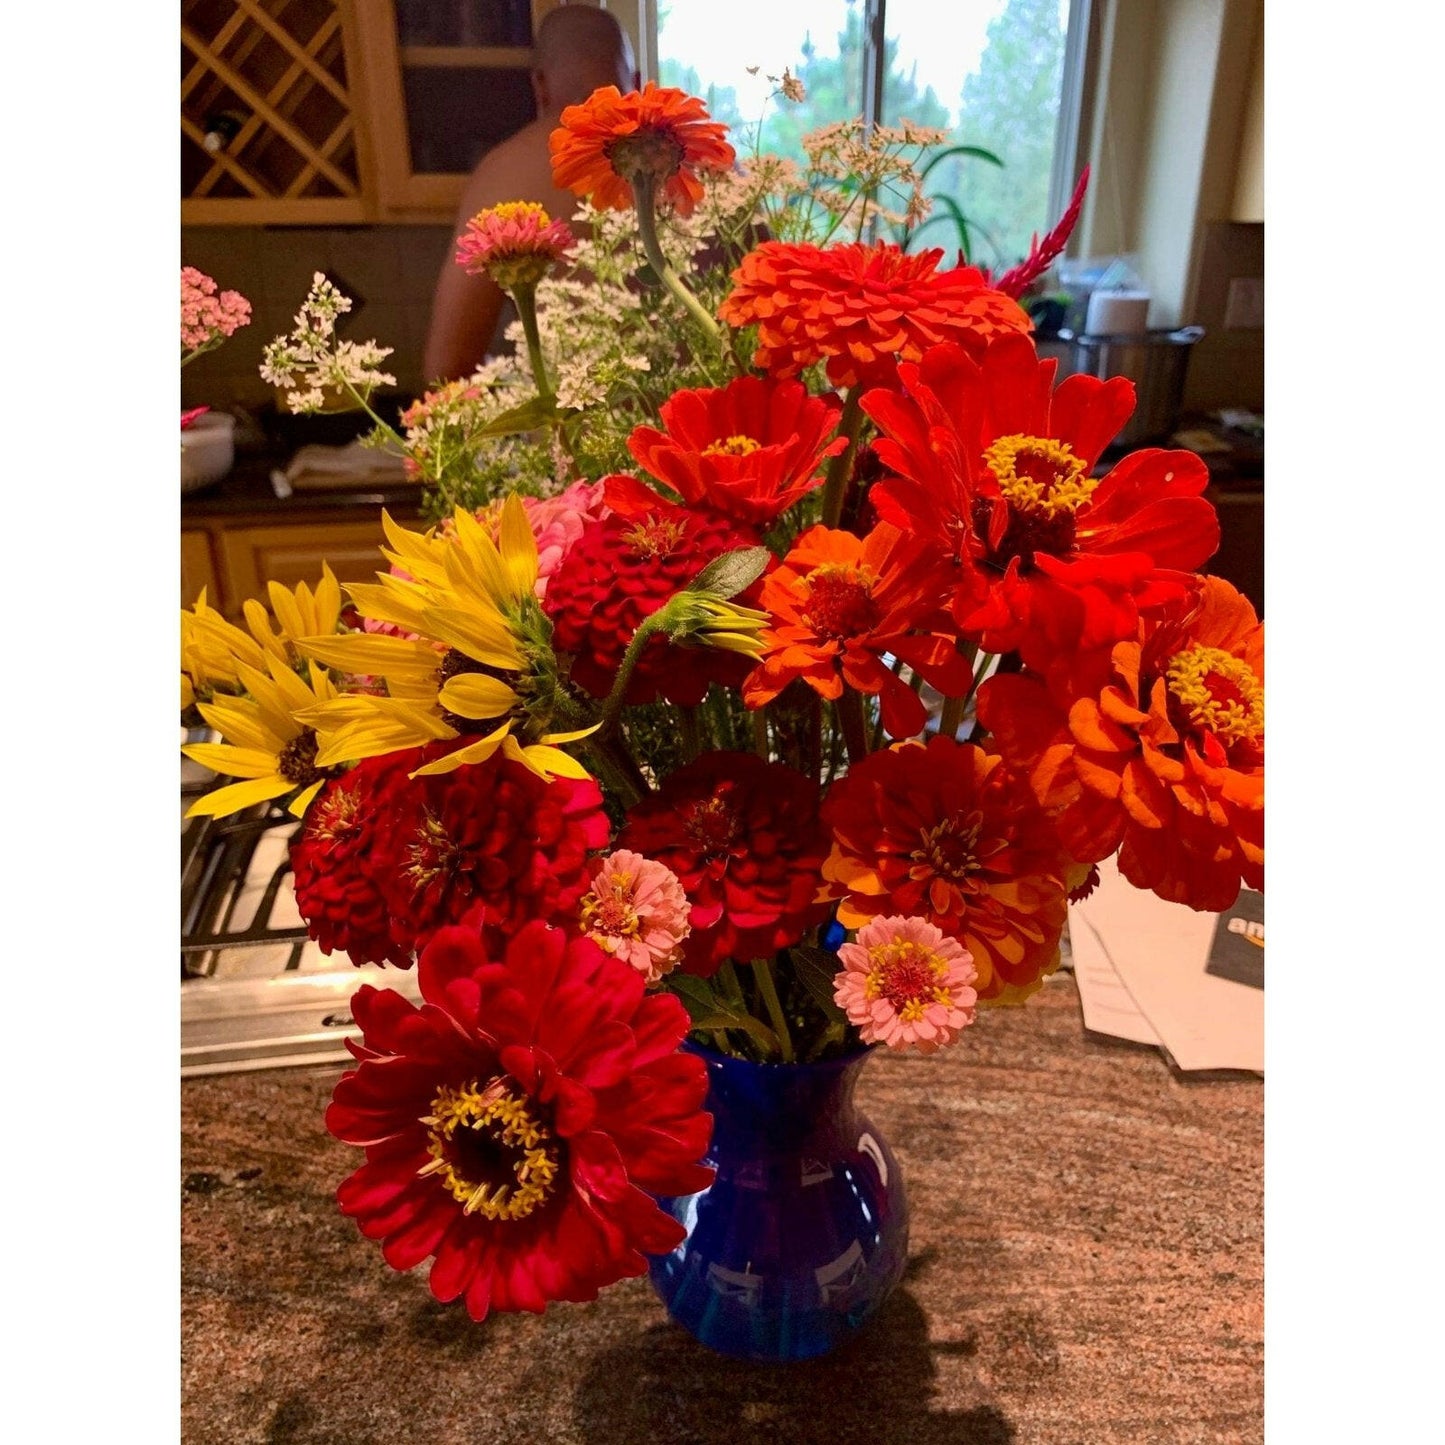 Locally grown flower bouquet subscription in Fort Collins, CO